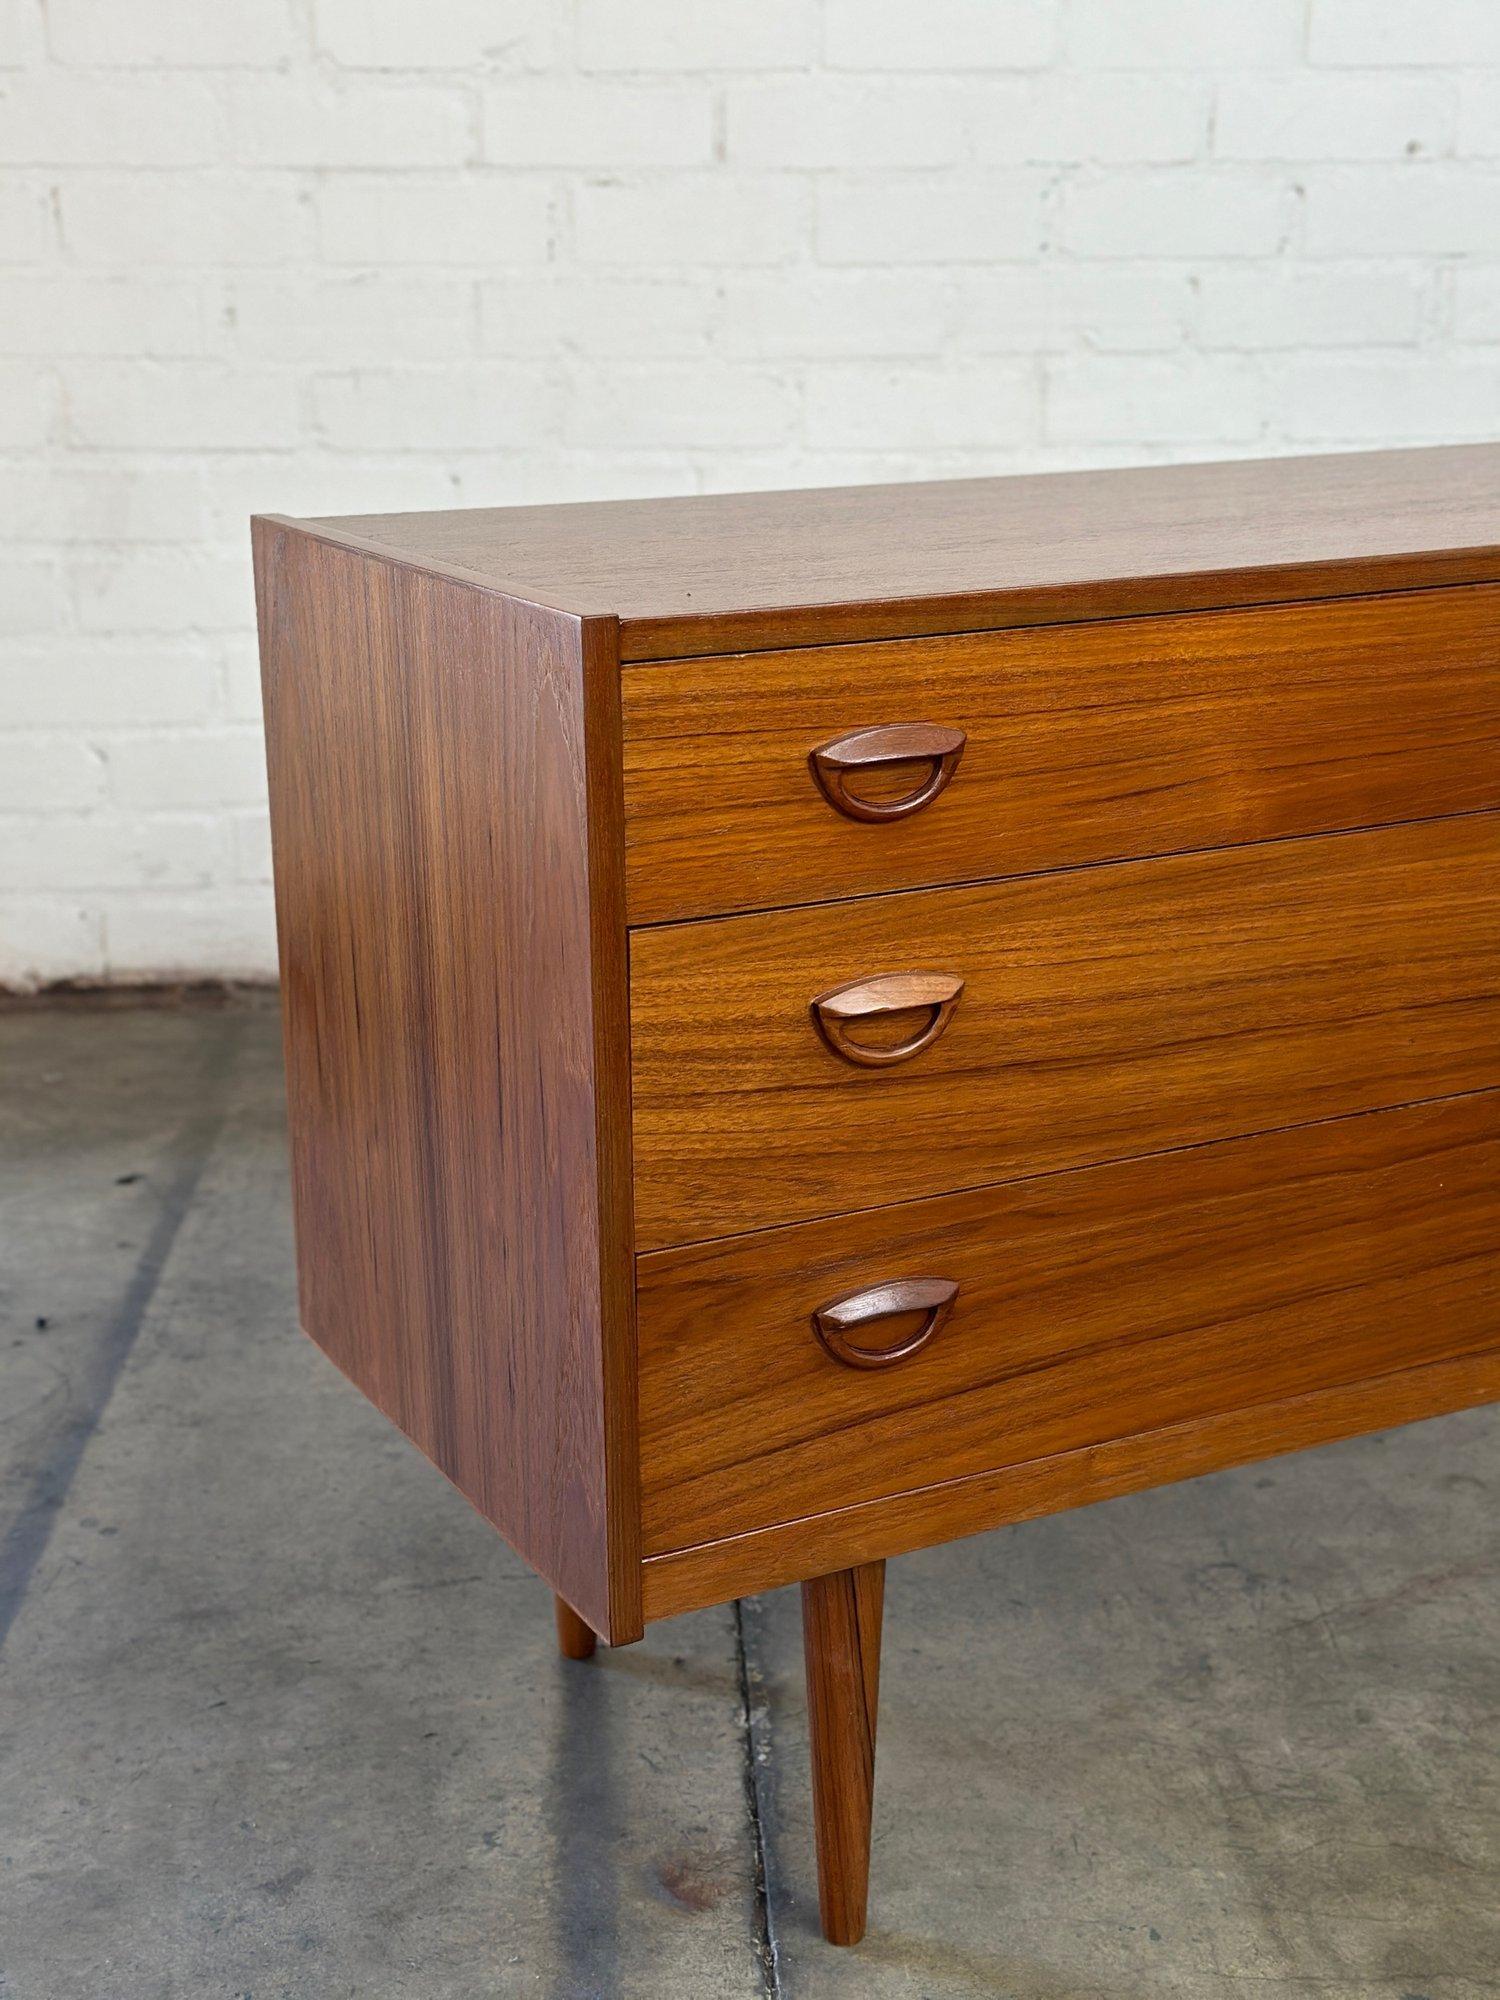 W71 D18 H29.5

Fully restored teak dresser by Kai Kristiansen. Item shows well with no major areas of wear. Item features exceptional sculpted handles made of solid teak and is structurally sound with fully functional drawers.

Circa 1960s